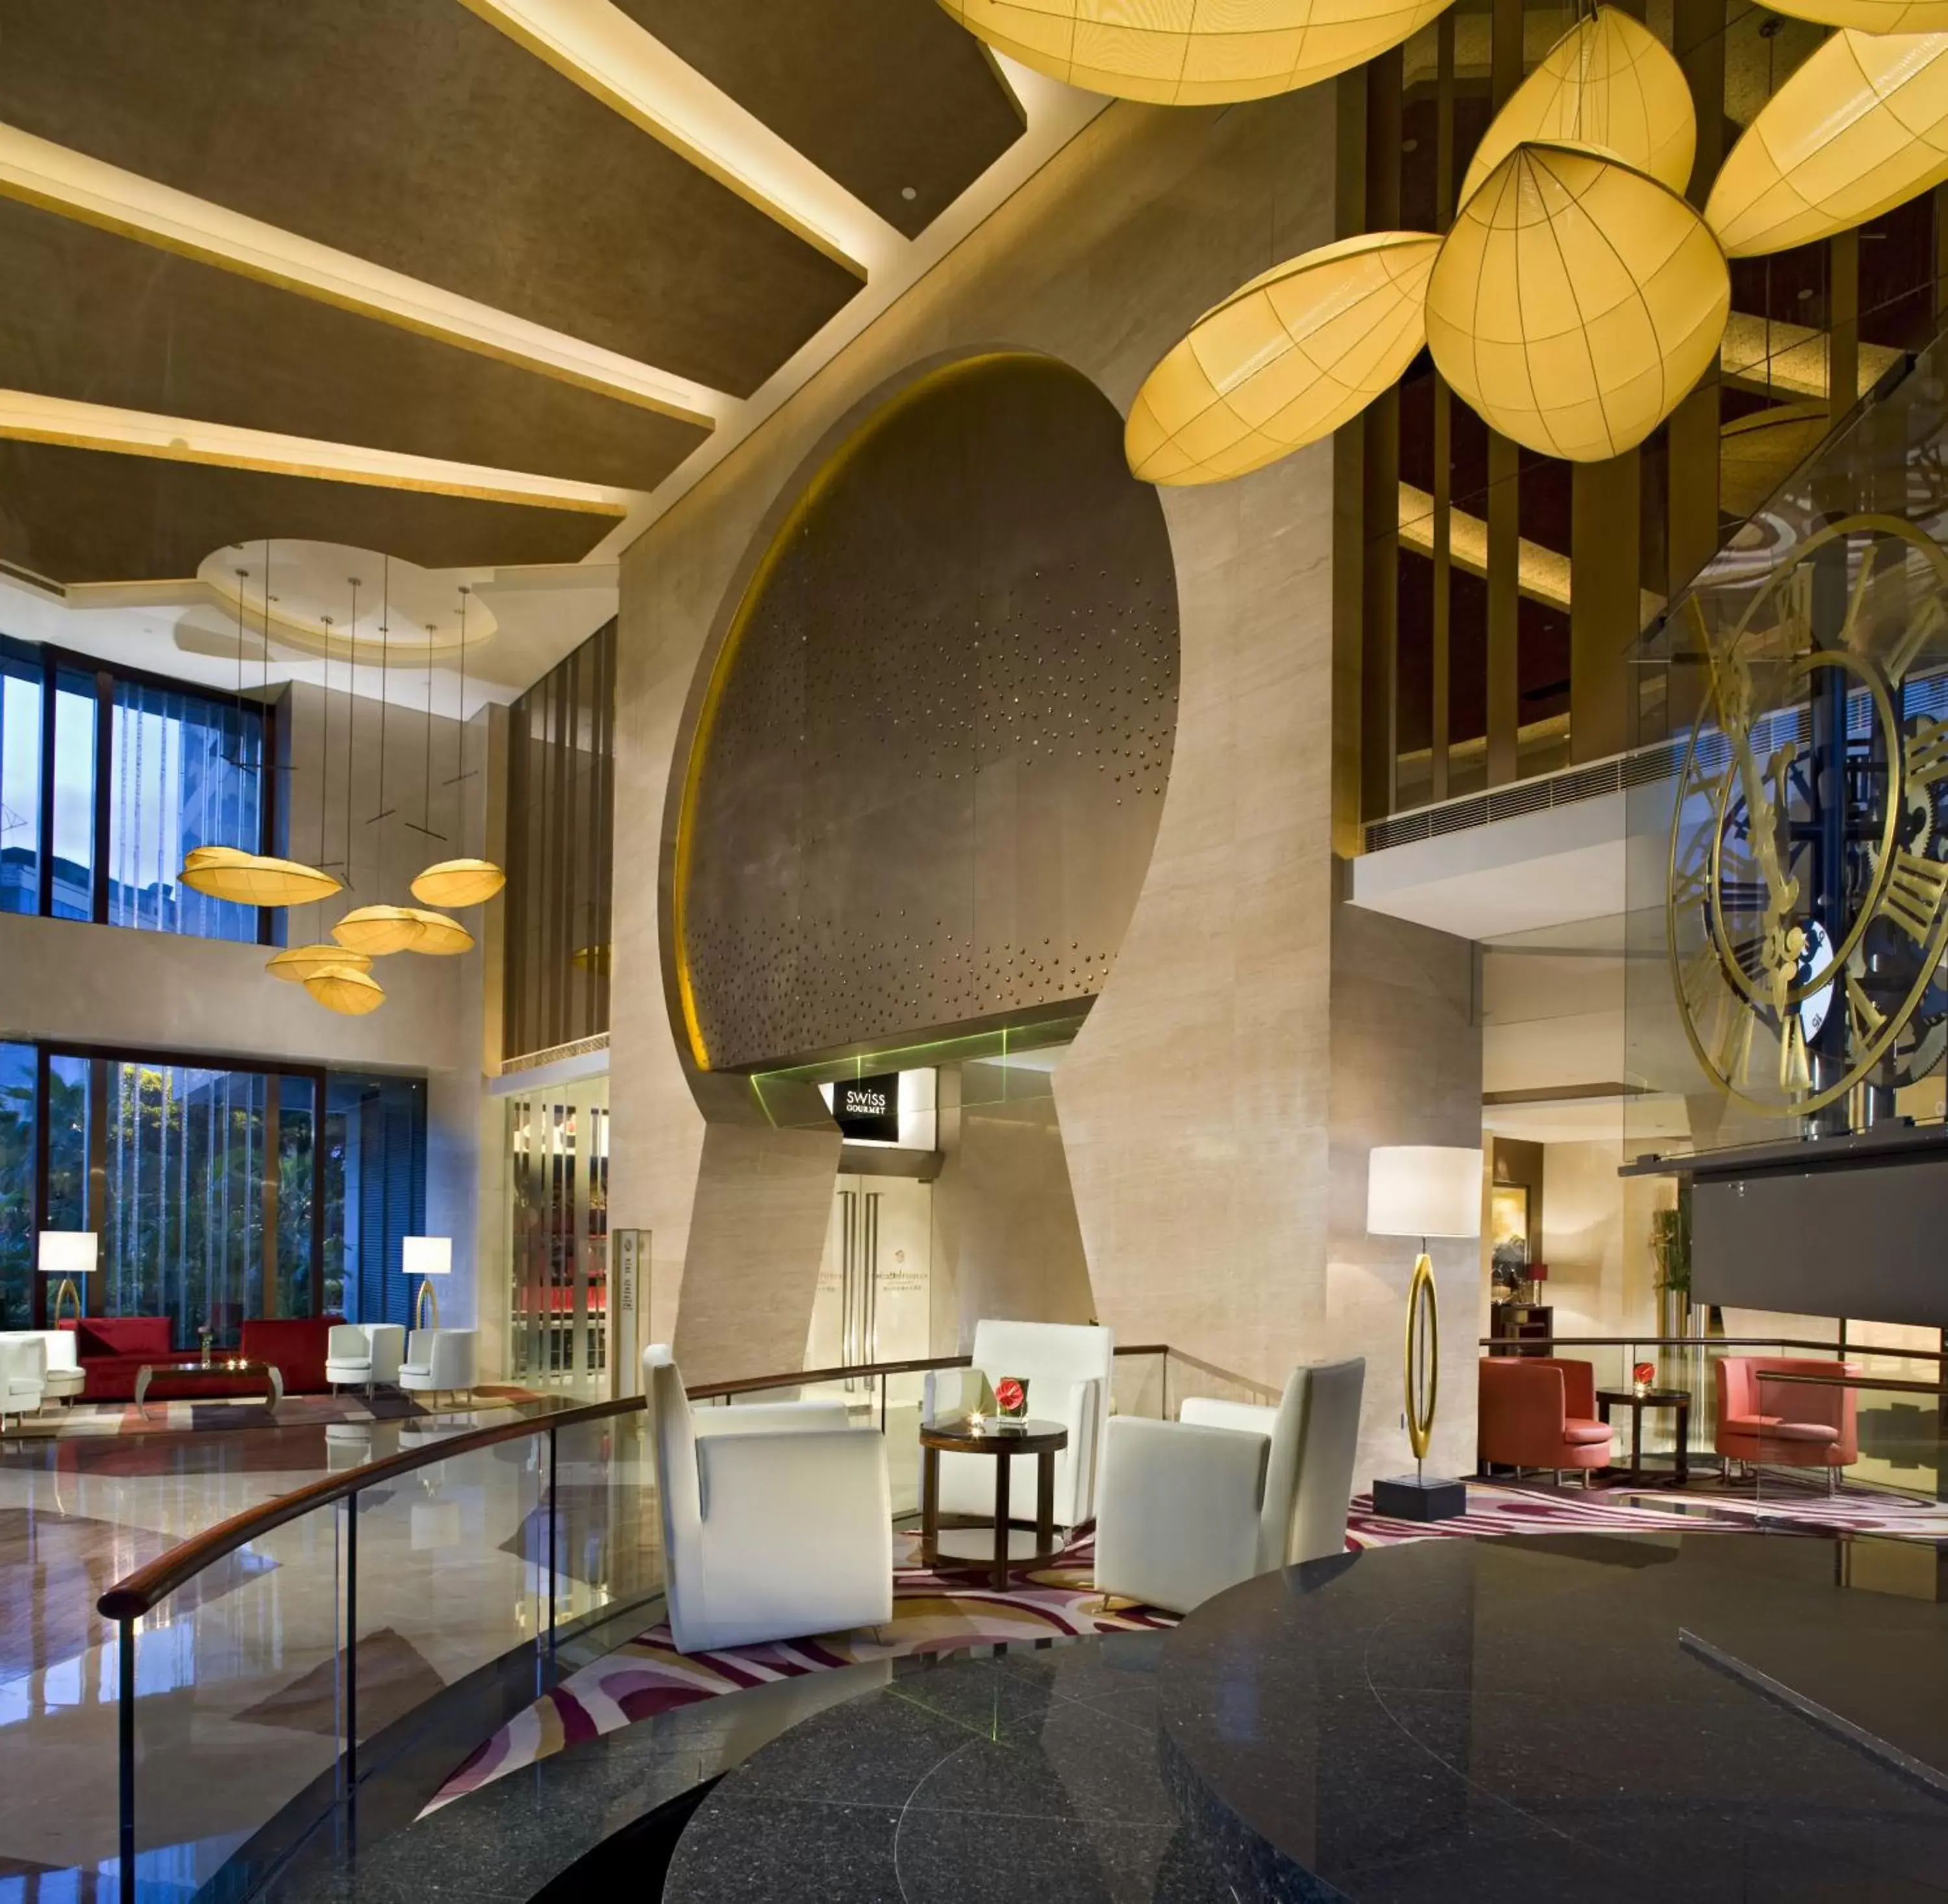 Lobby or reception in Swissotel Foshan, Guangdong - Free shuttle bus during canton fair complex during canton fair period